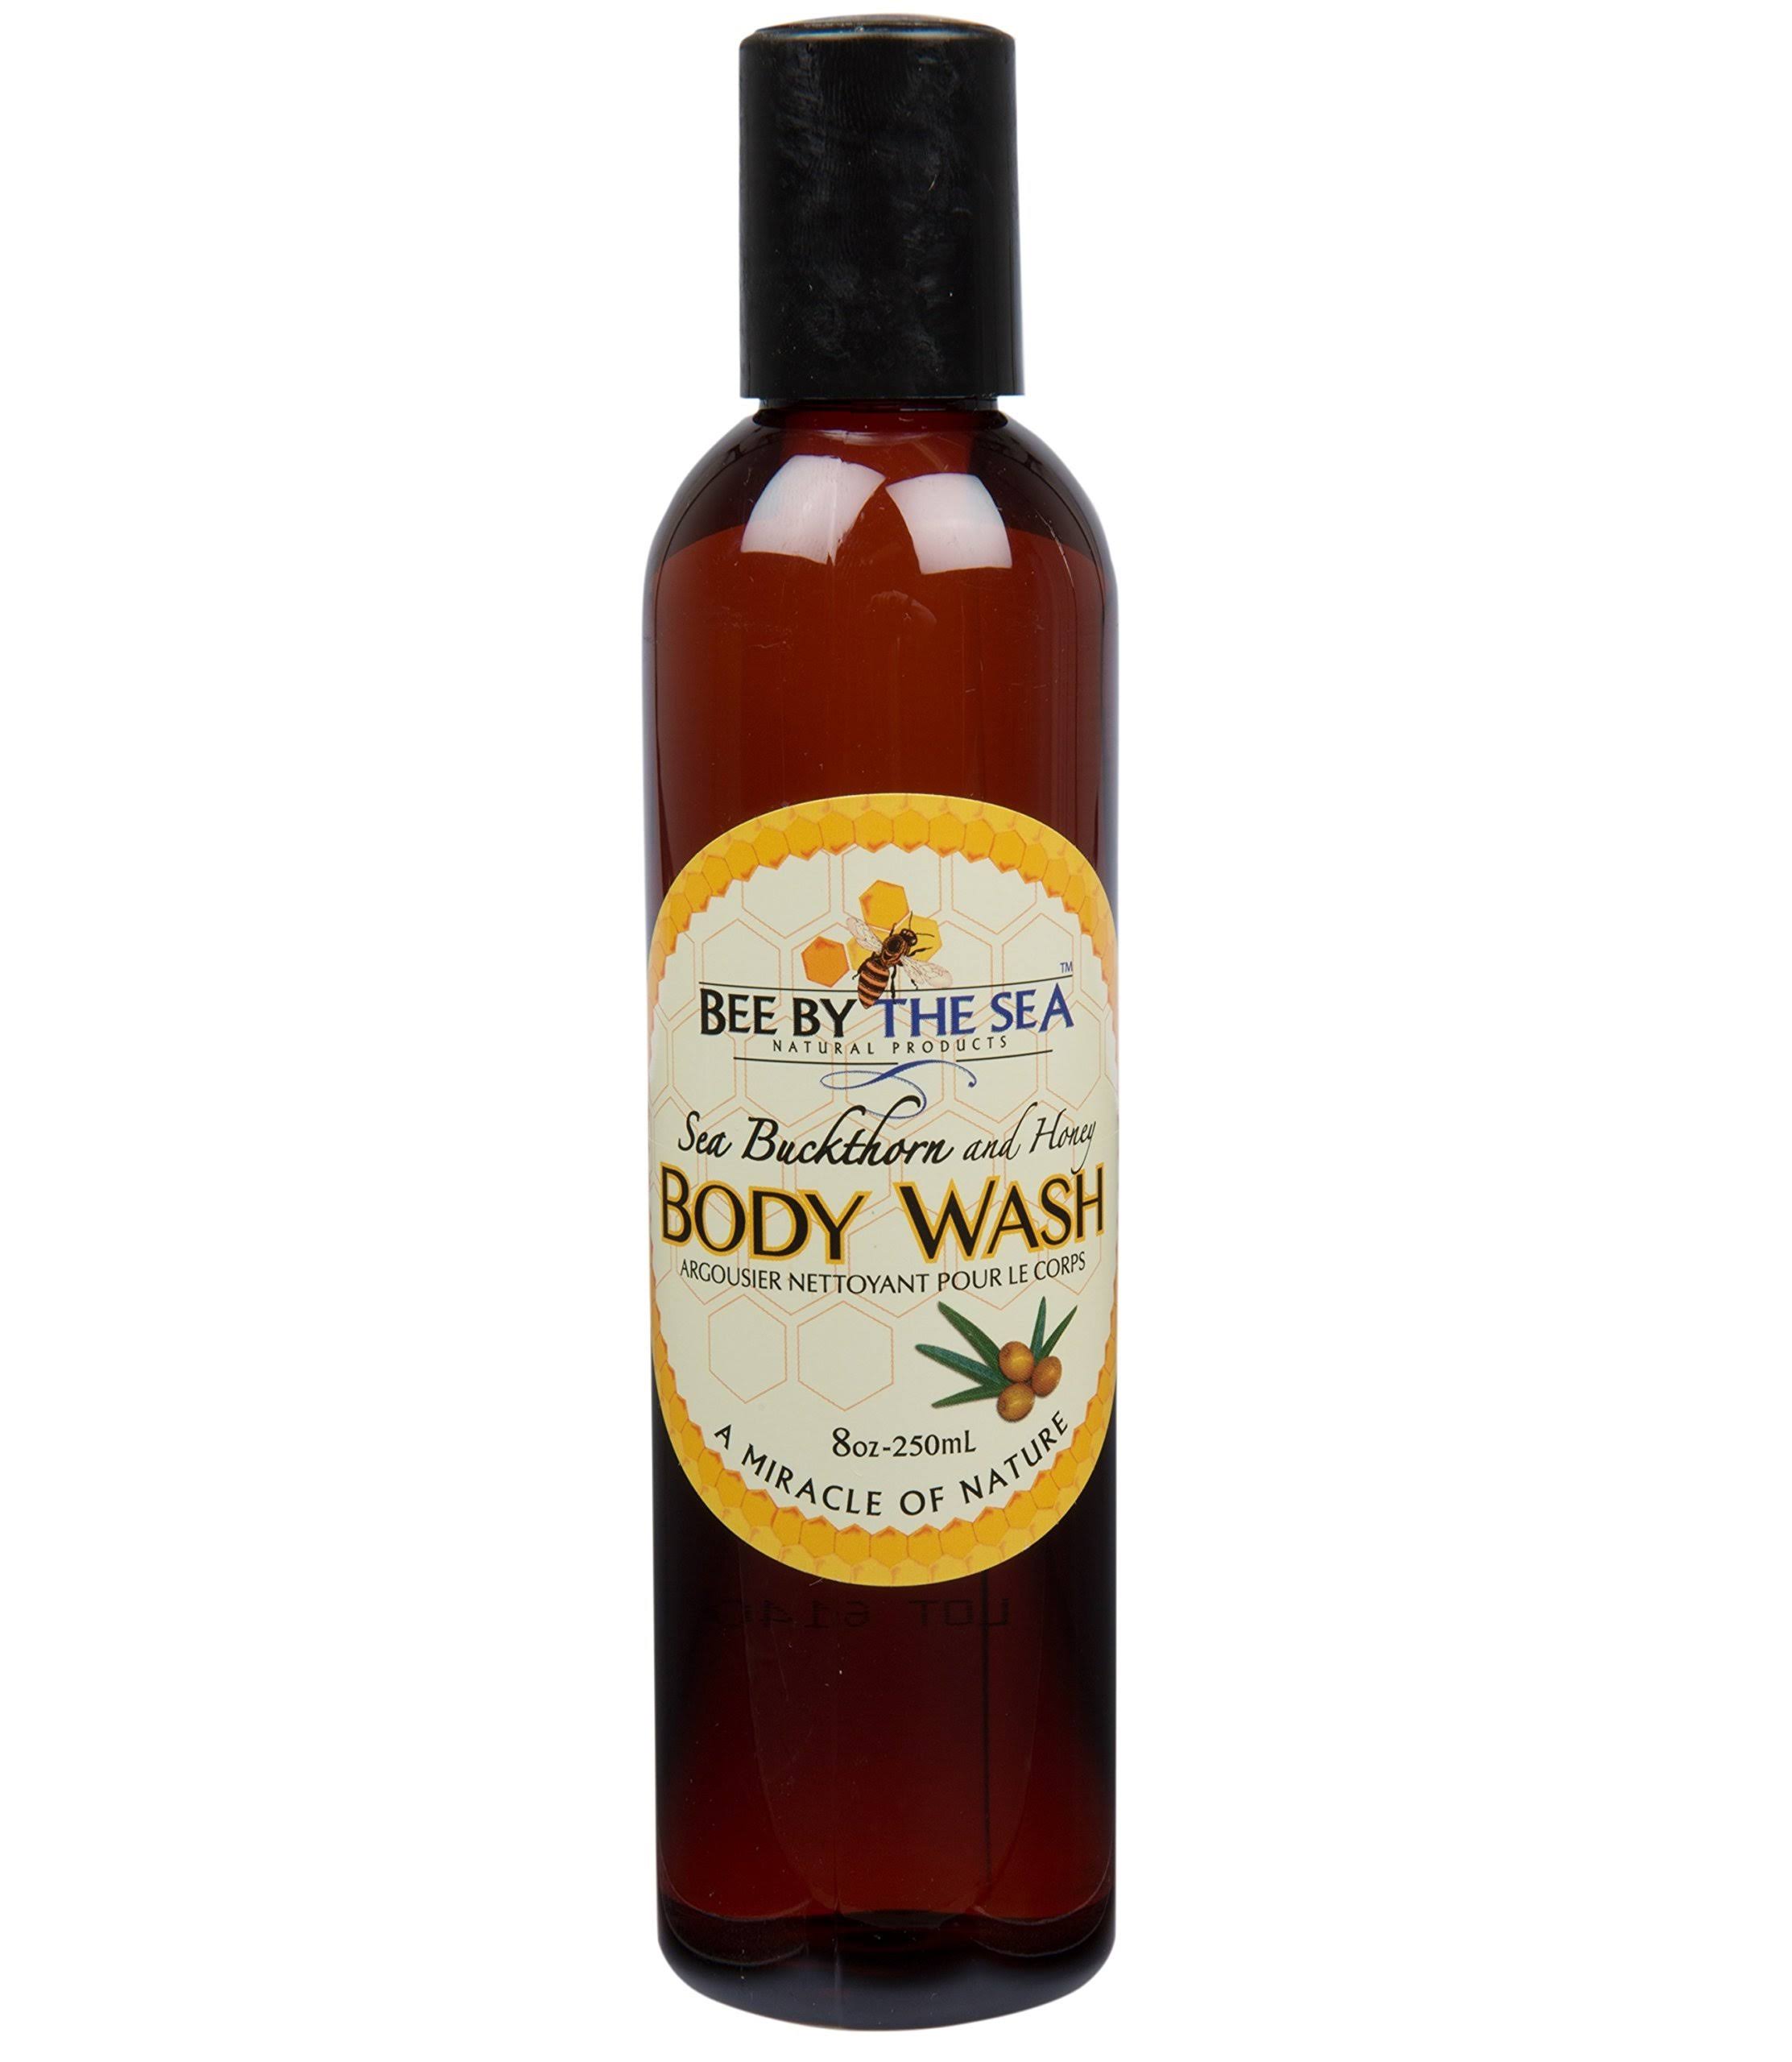 Bee By the Sea Sea Buckthorn and Honey Body Wash - 8oz